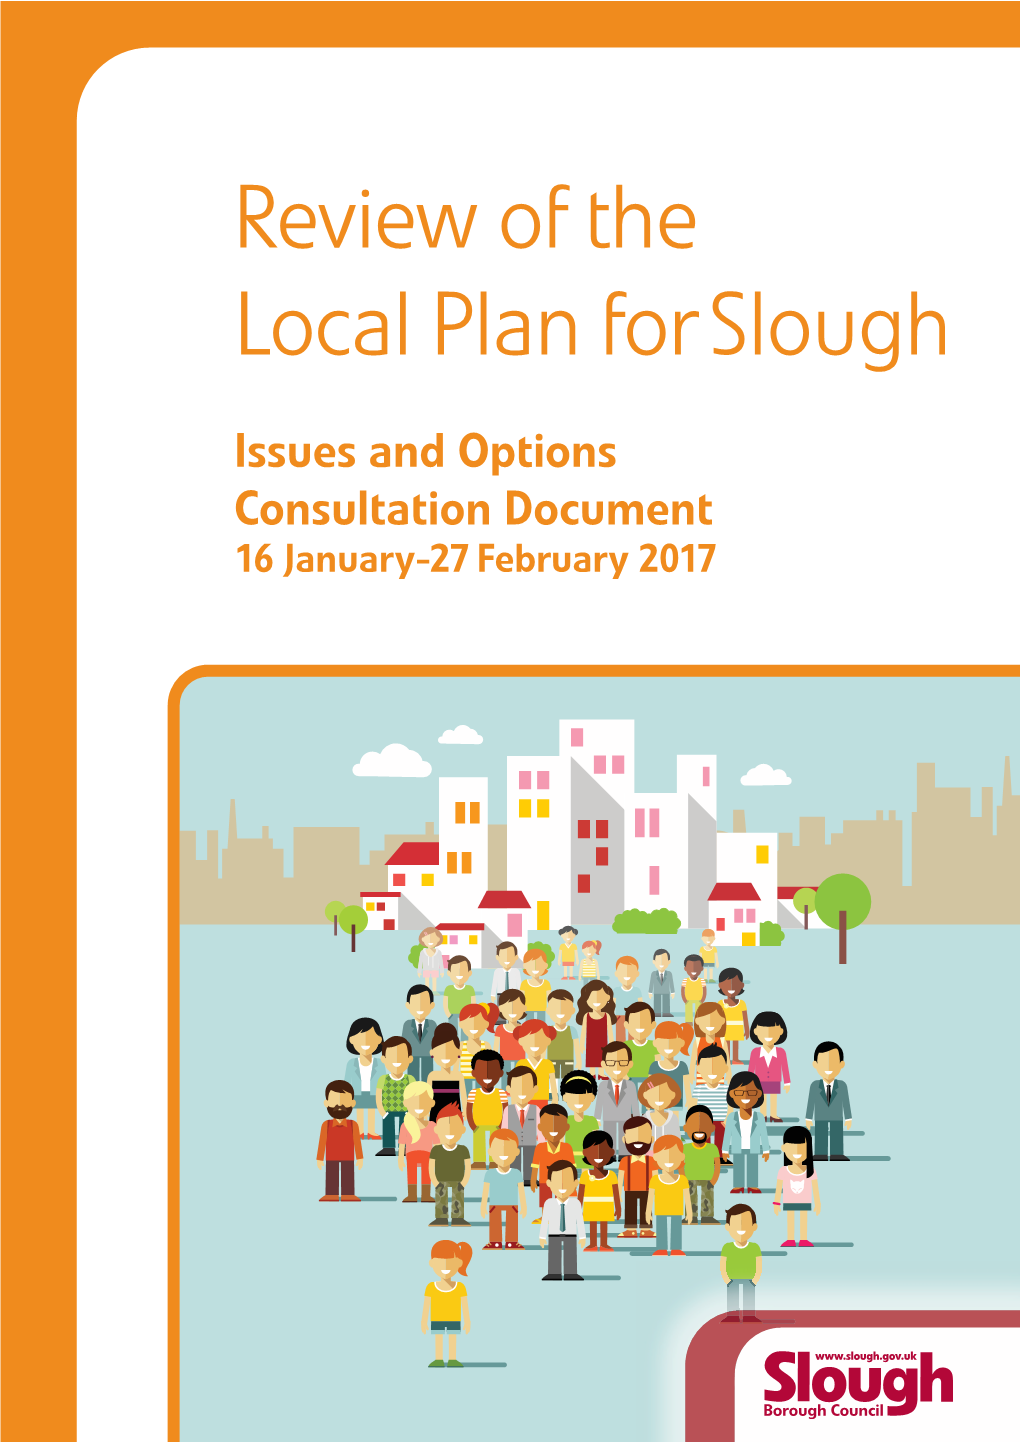 Issues and Options Consultation Document 16 January-27 February 2017